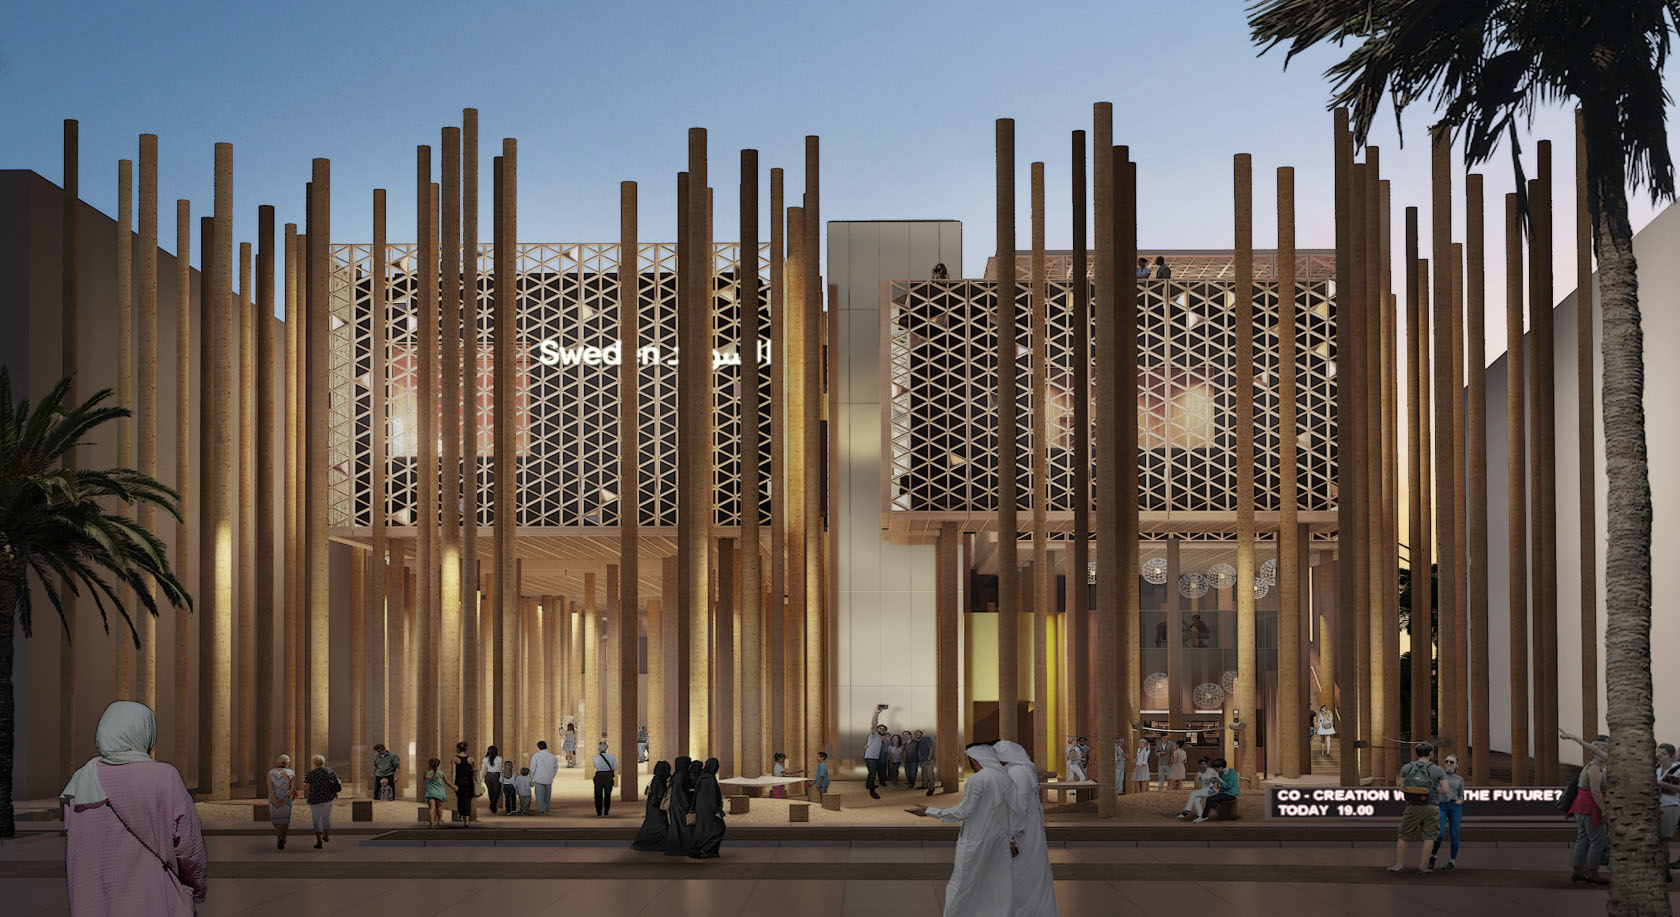 Outdoor view of the Swedish Pavilion at Expo in Dubai